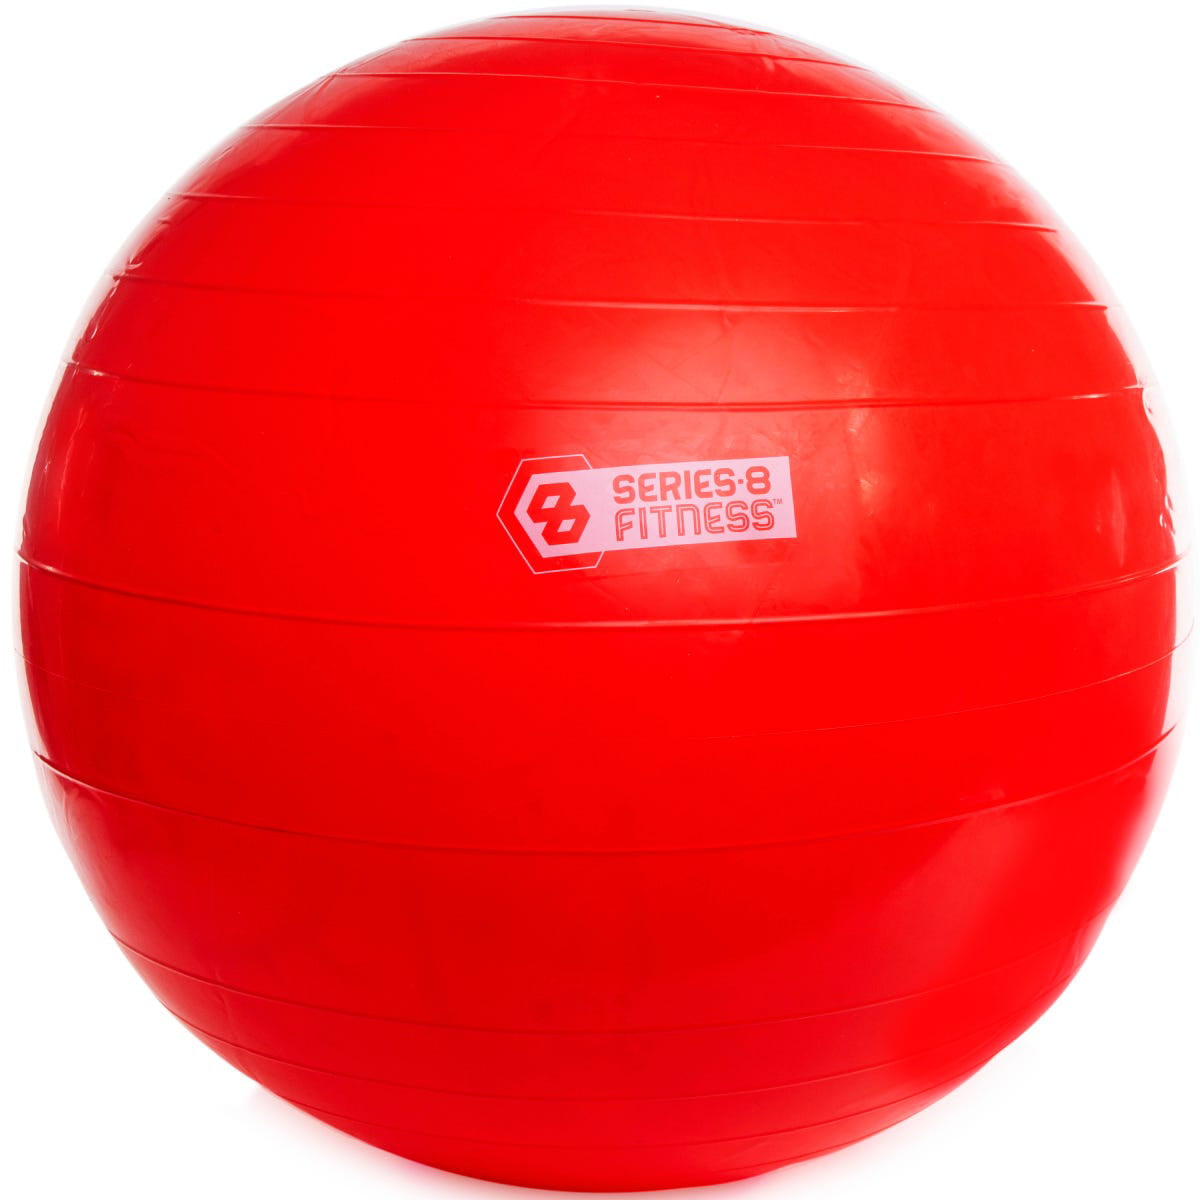 SERIES-8 FITNESS YOGA & EXERCISE BALL 26in/65cm TONE YOUR CORE & IMPROVE BALANCE 